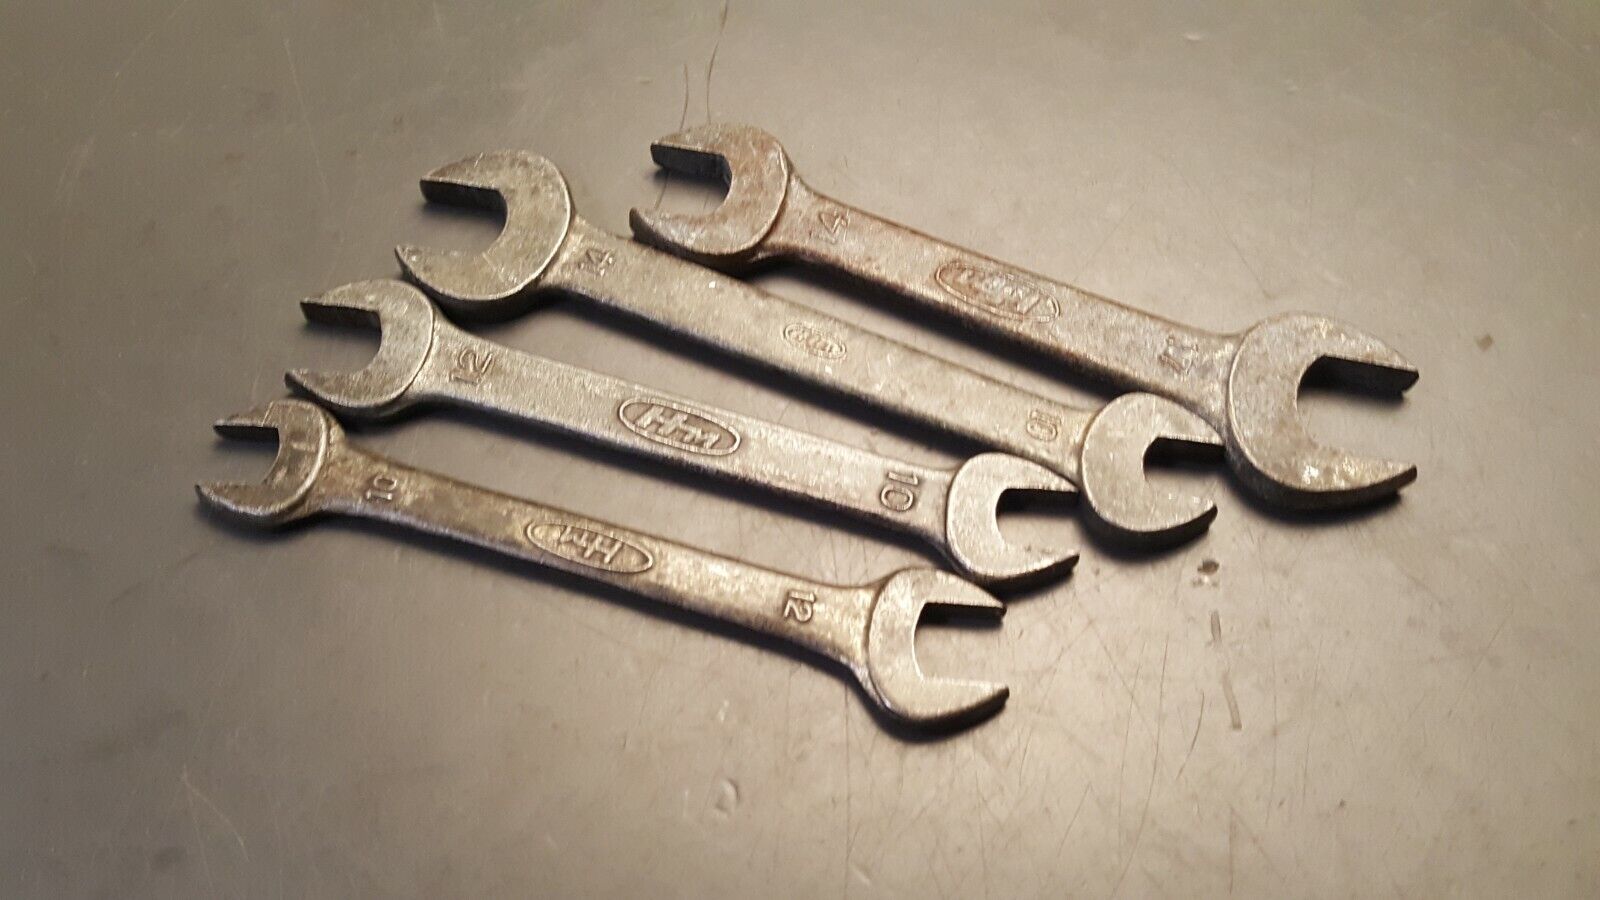 Lot of 4 VTG Honda Motorcycle Kit Wrenches (2)10-12mm (1) 10-14mm (1) 14-17mm